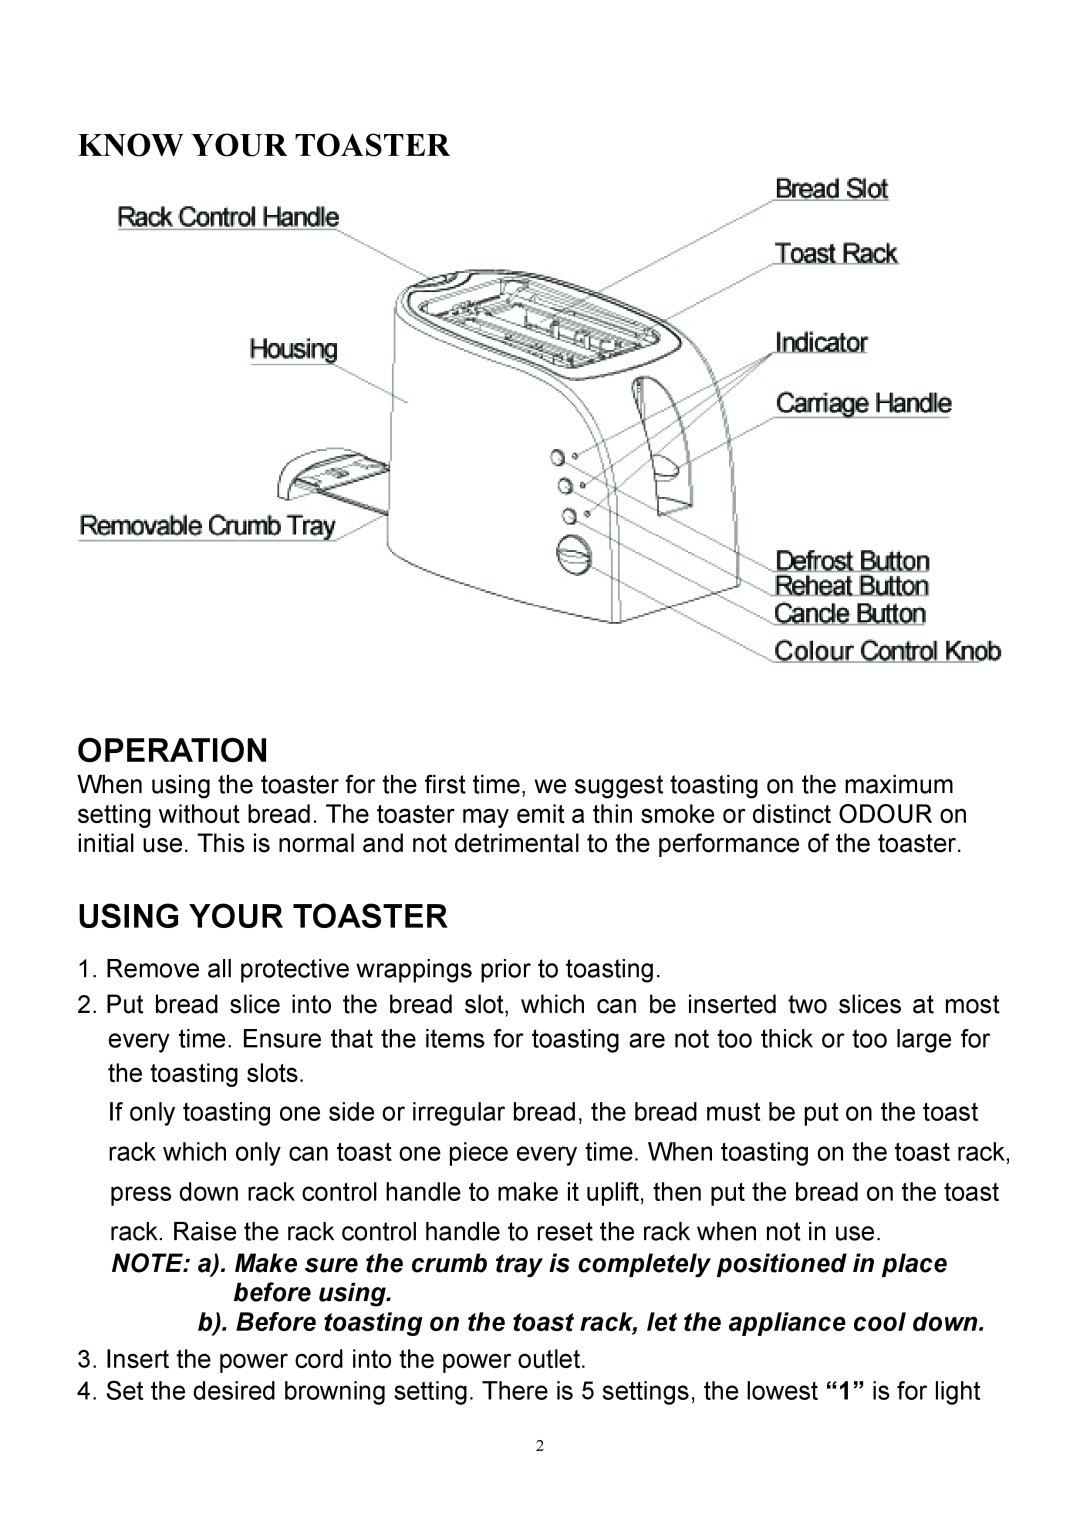 Sharp KZ-2S01W manual Know Your Toaster, Operation, Using Your Toaster 